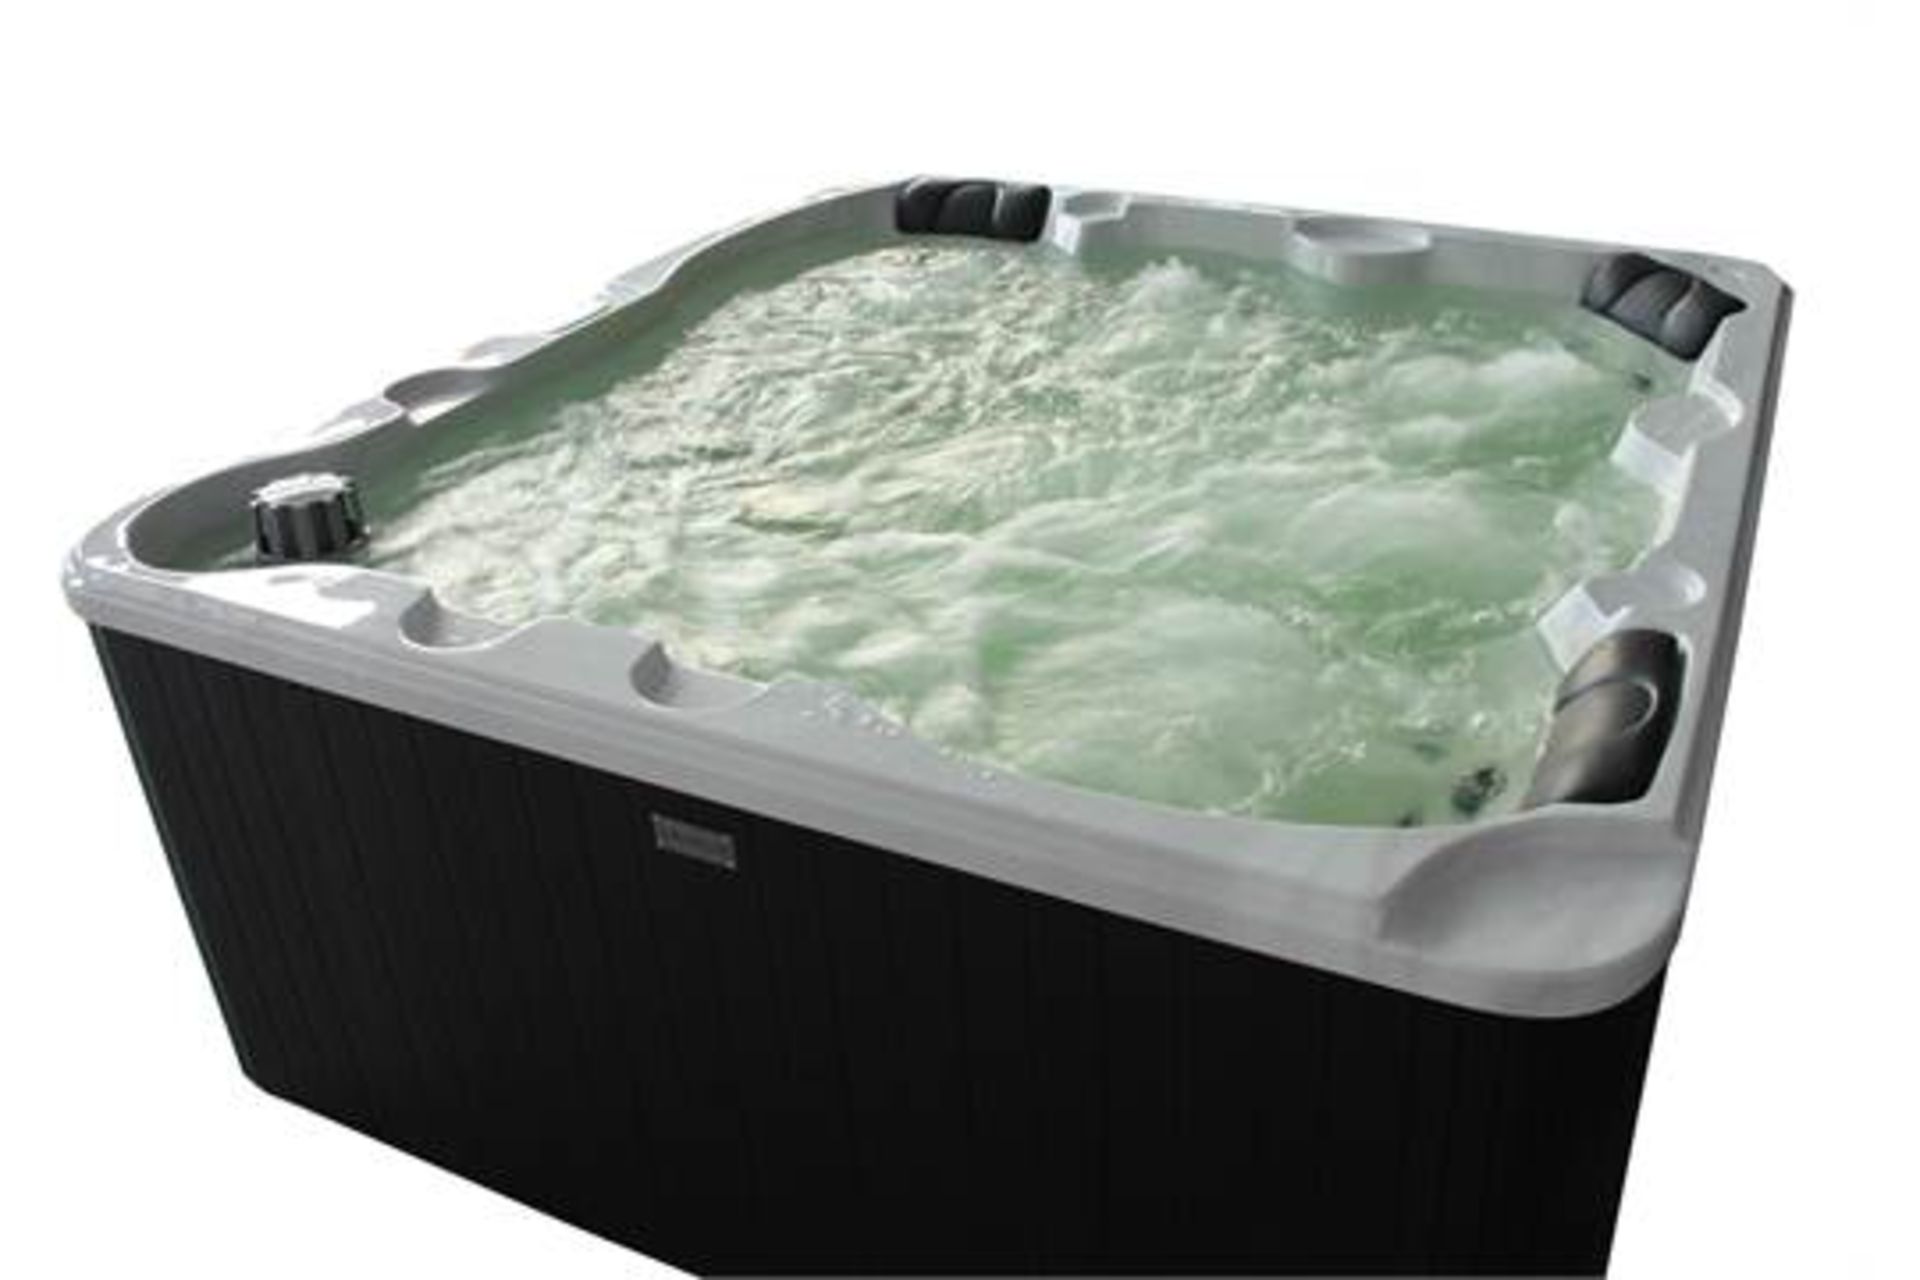 HIGH QUALITY NEW PACKAGED 2016 HOT TUB, MATCHING STEPS, SIDE, INSULATING COVER, TOP USA RUNNING GEAR